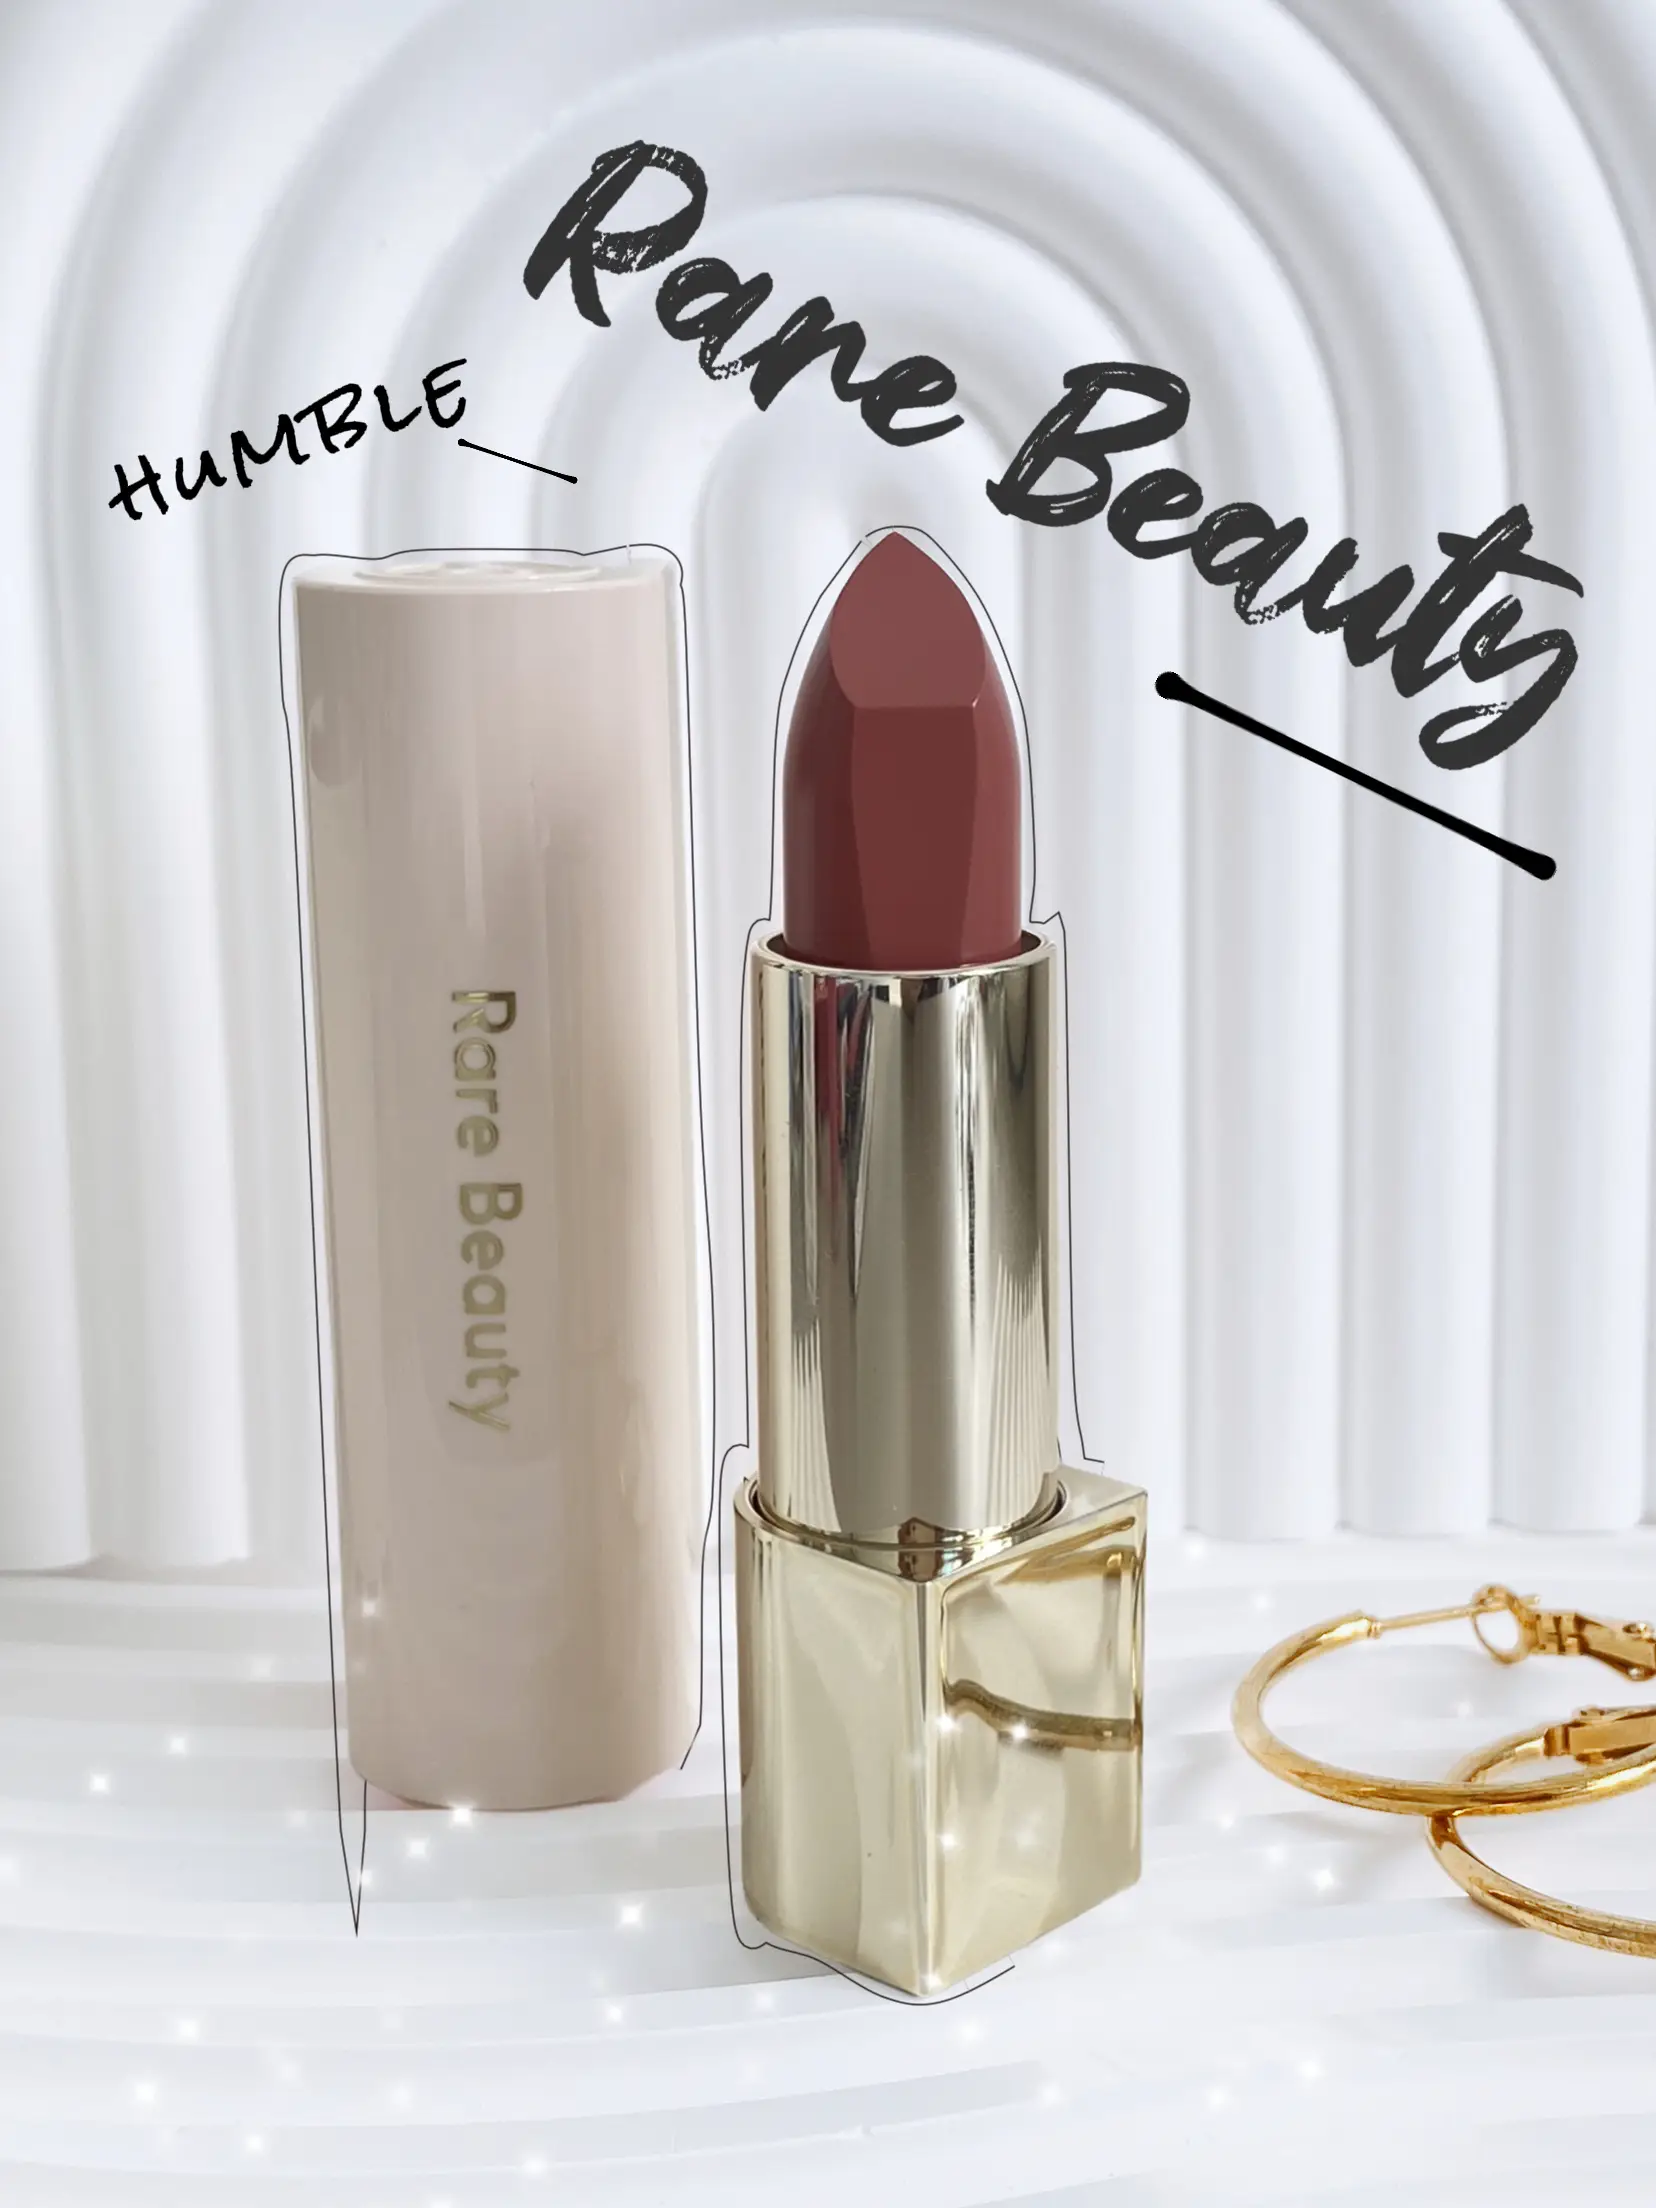 Rare Beauty Review  A Month With Rare Beauty - The Lipstick Narratives